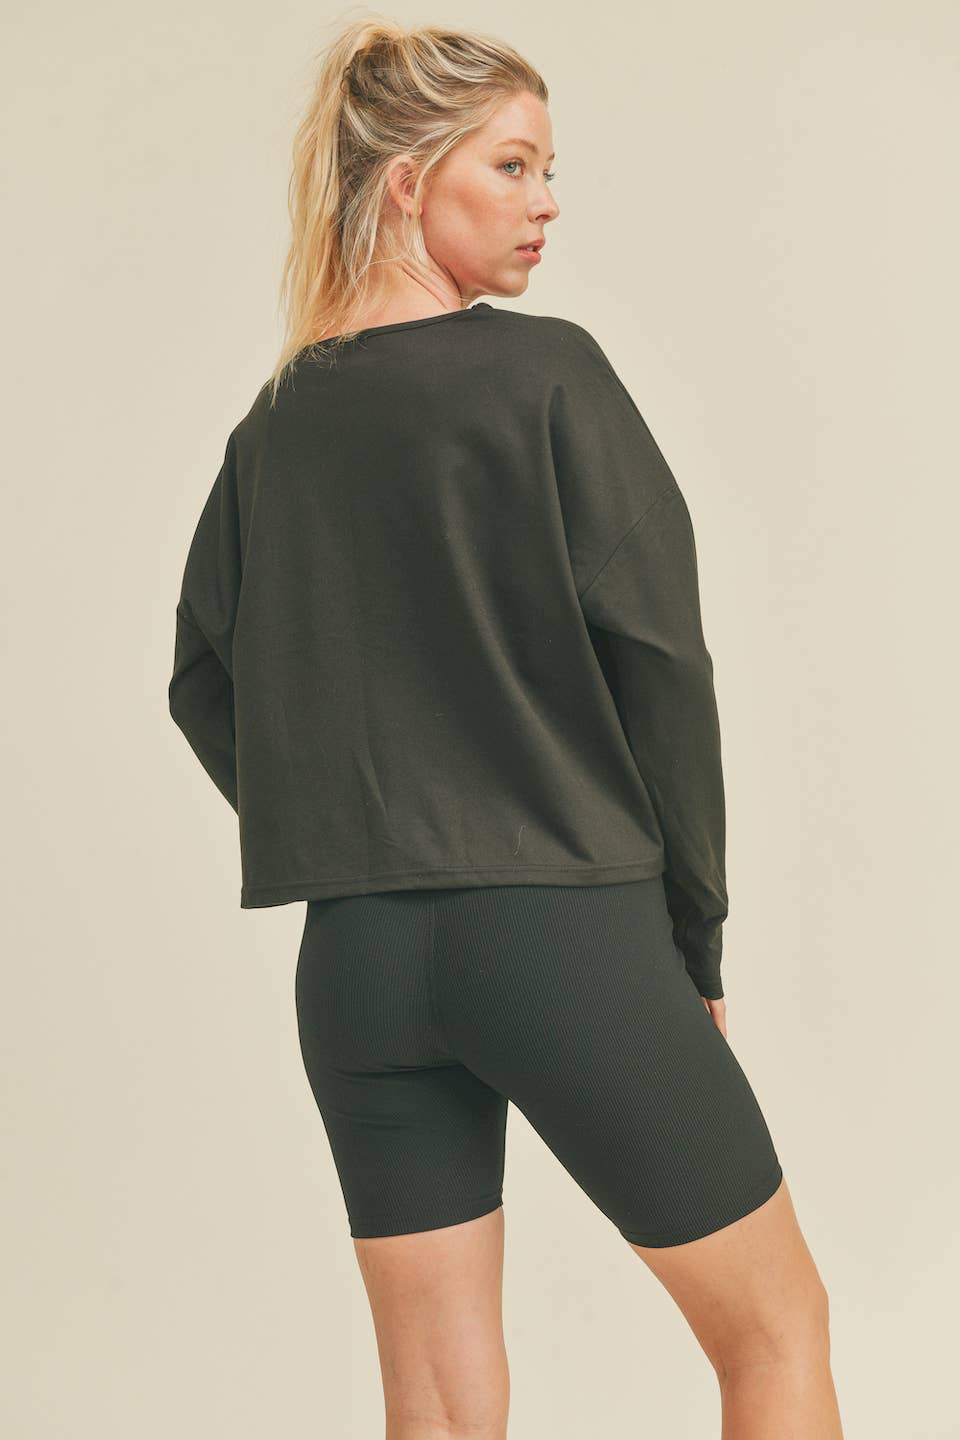 Soft Essential Long Sleeve Cropped Top